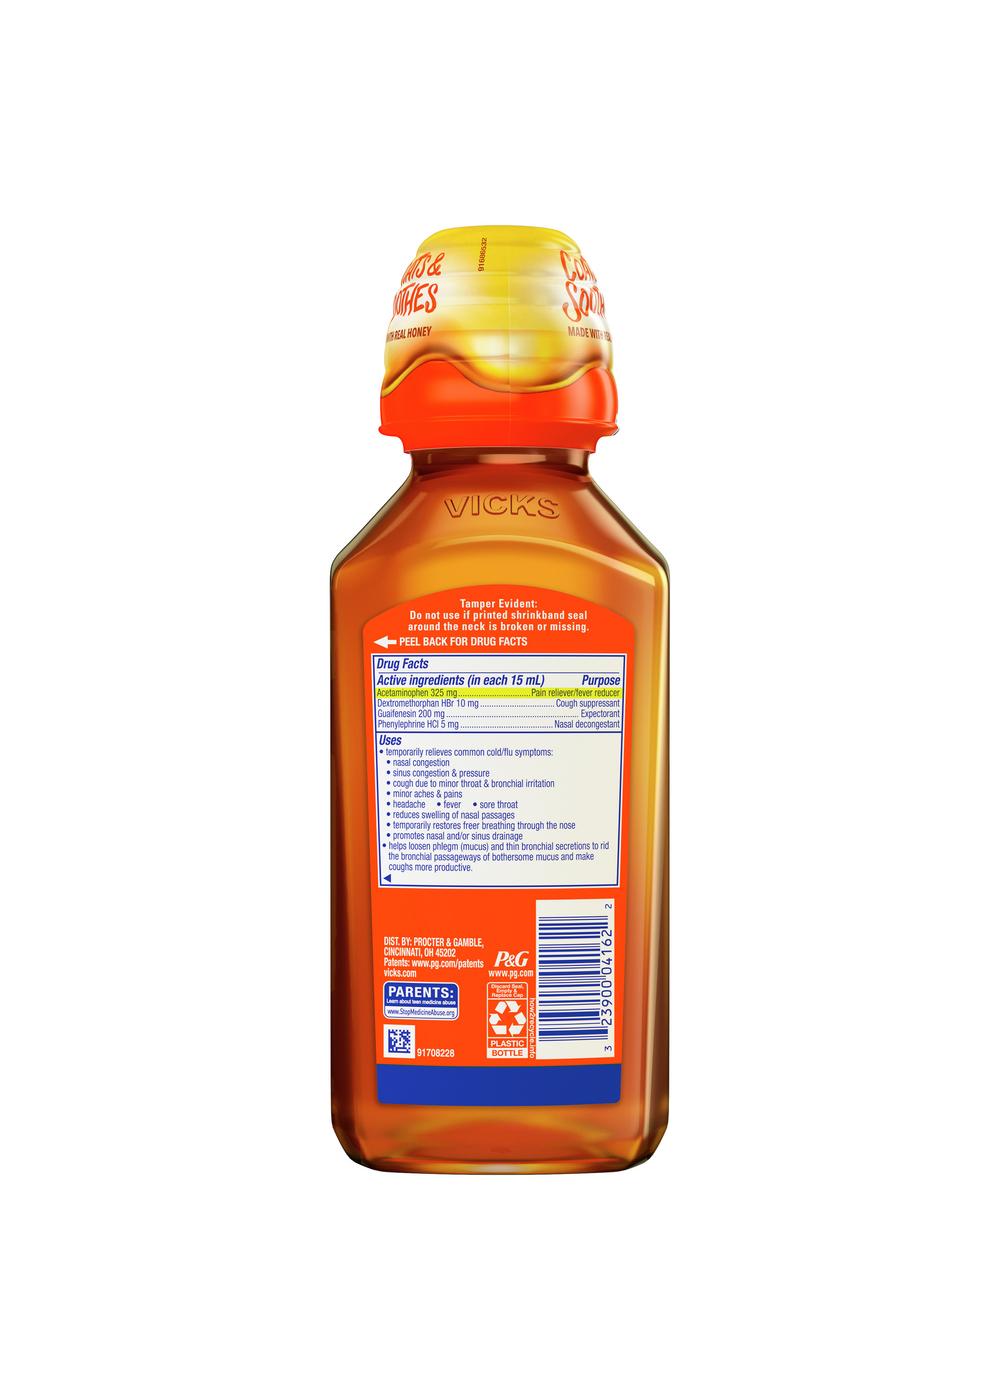 Vicks DayQuil SEVERE Cold & Flu Liquid - Honey; image 4 of 11